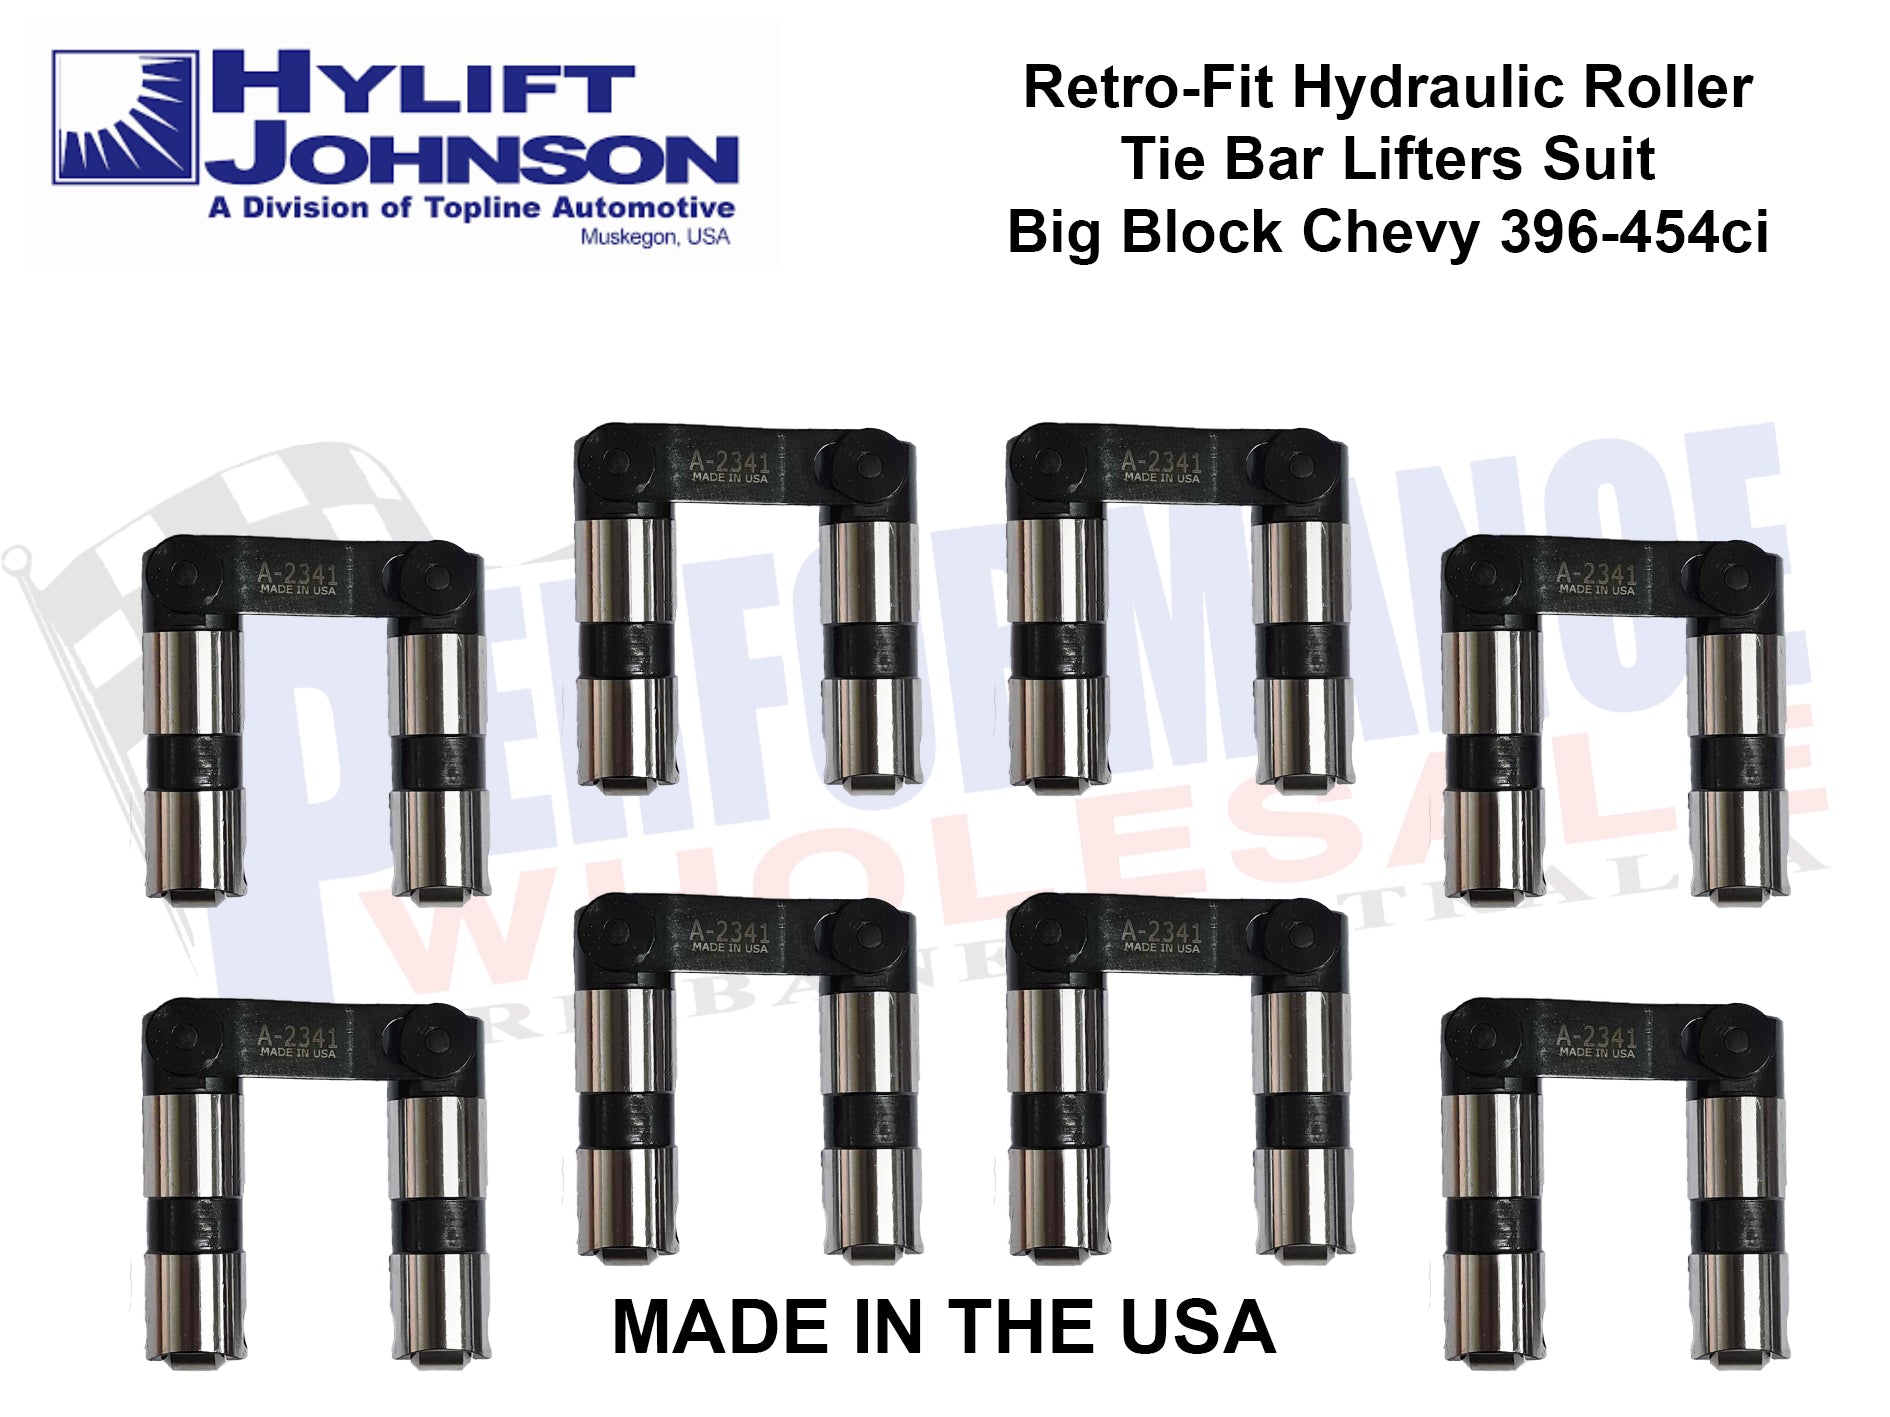 Hy-lift Johnson Retro-Fit Hydraulic Roller Tie Bar Lifters Suit Big Block Chevy 396-454ci